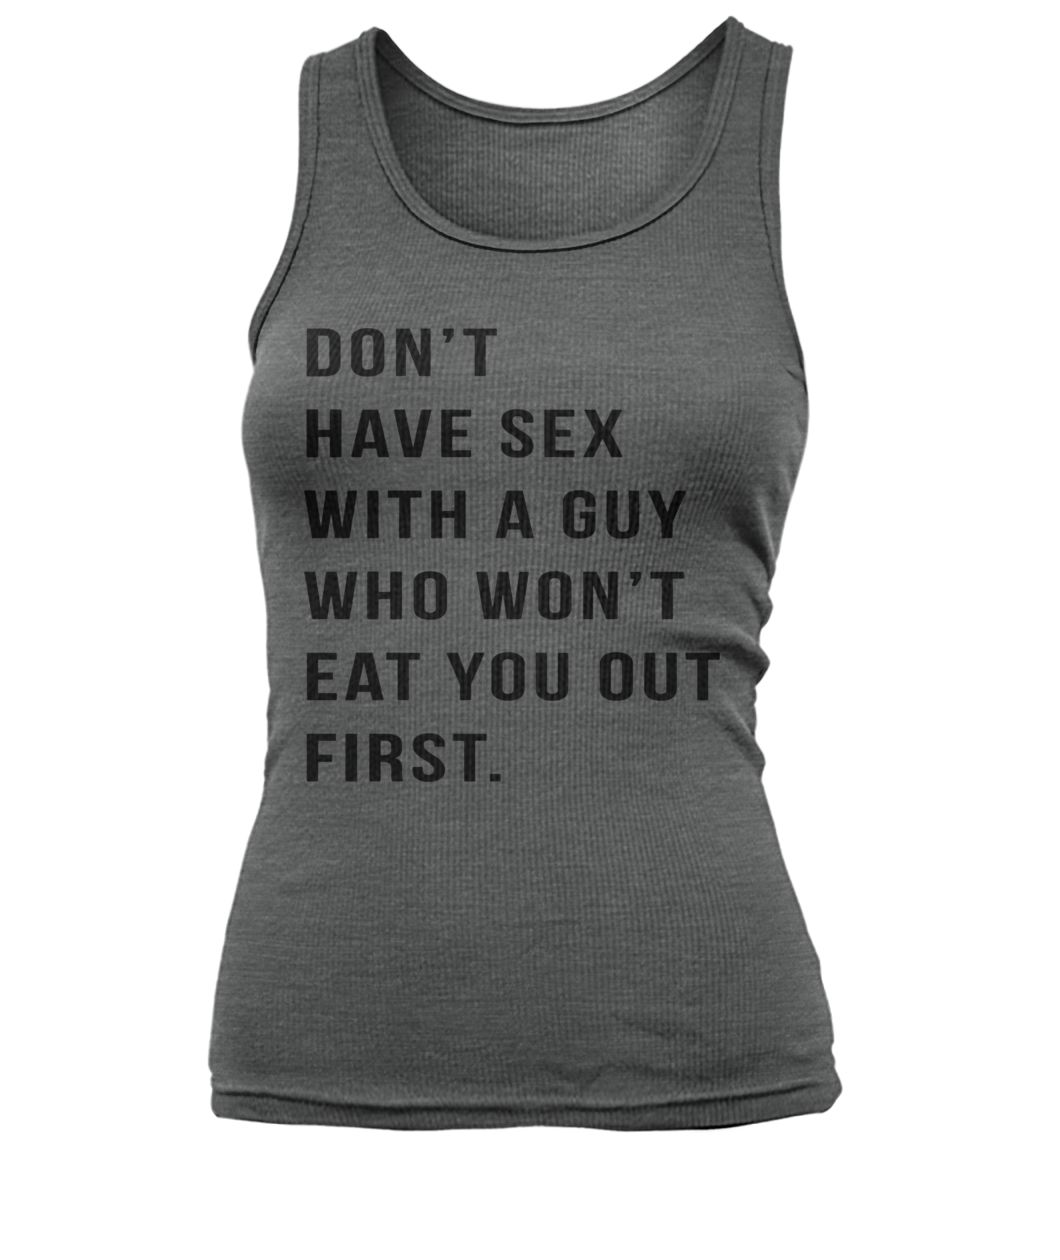 Don't have sex with a guy who won't eat you out first women's tank top